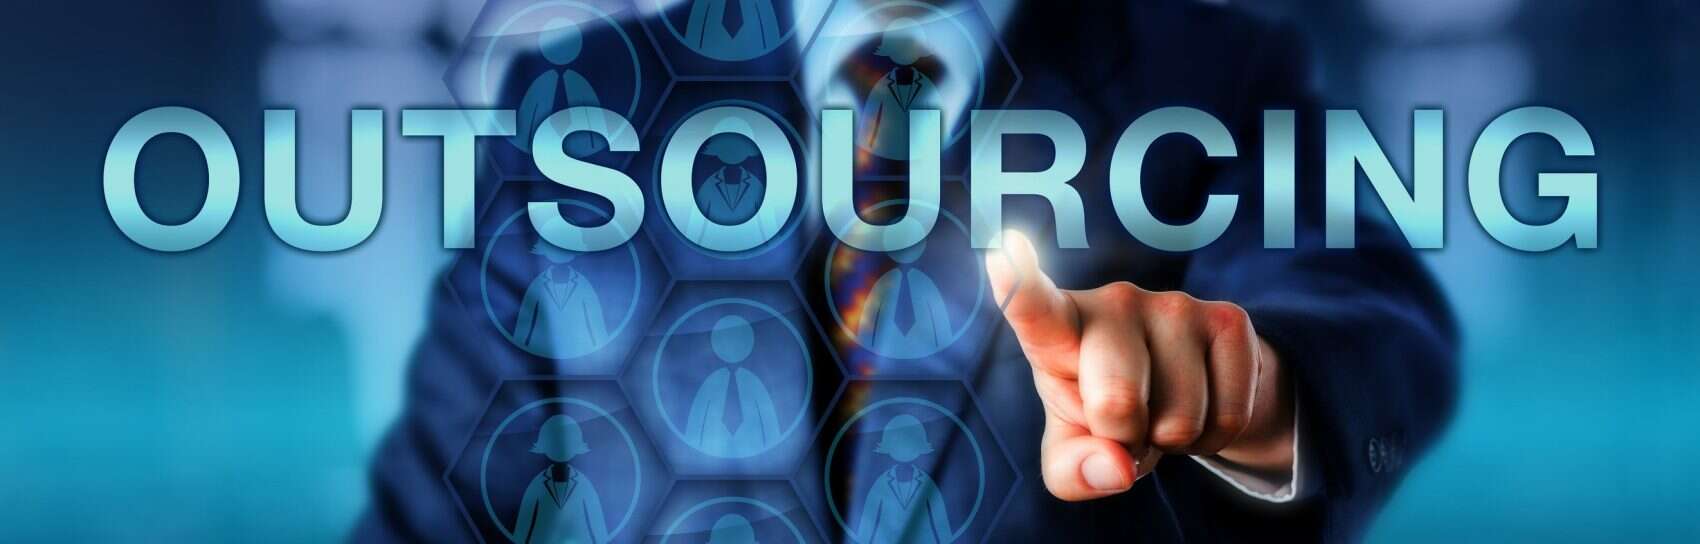 Outsourcing Small Business Function